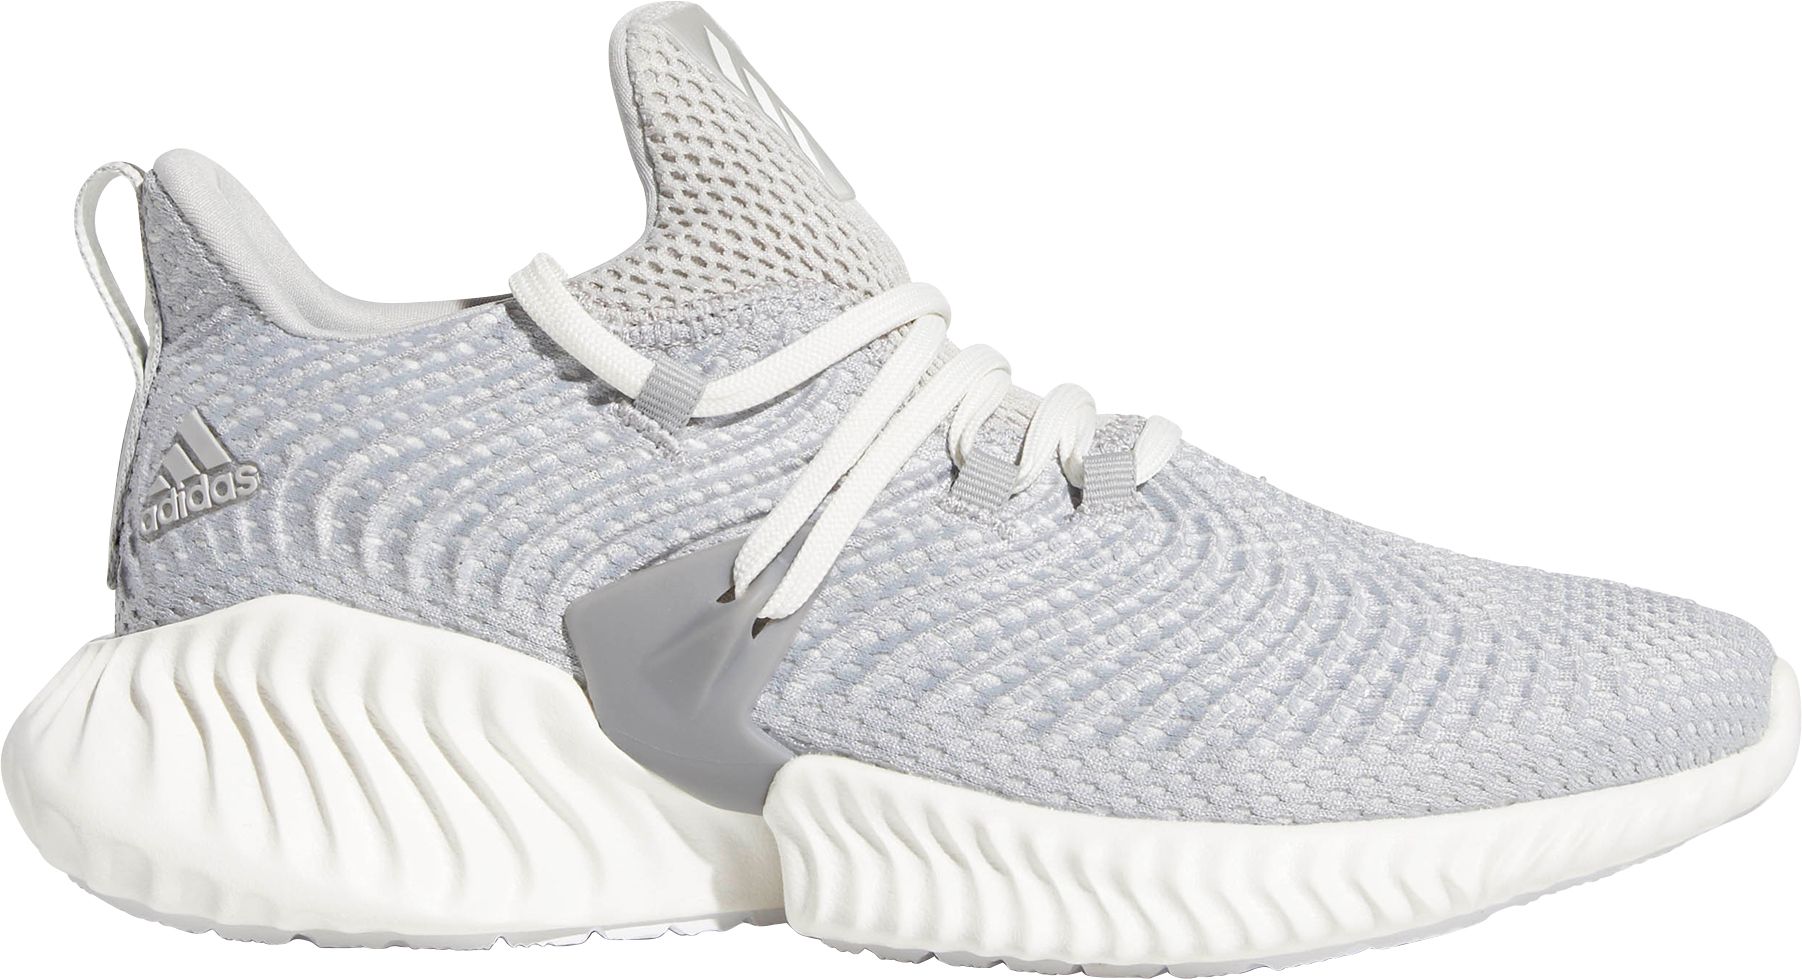 adidas alphabounce shoes women's